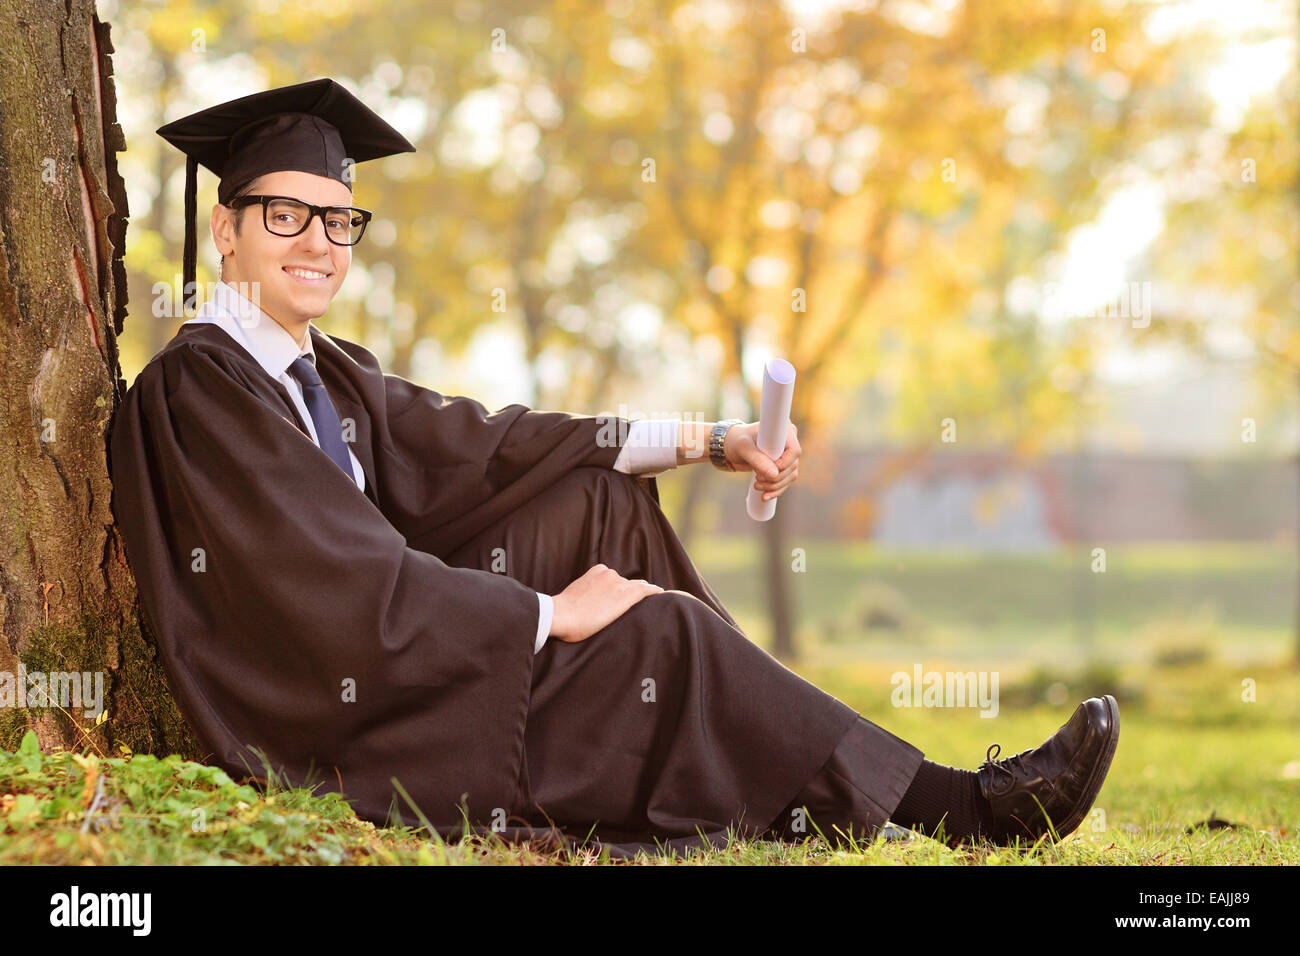 Graduate student sitting by a tree in a park Stock Photo